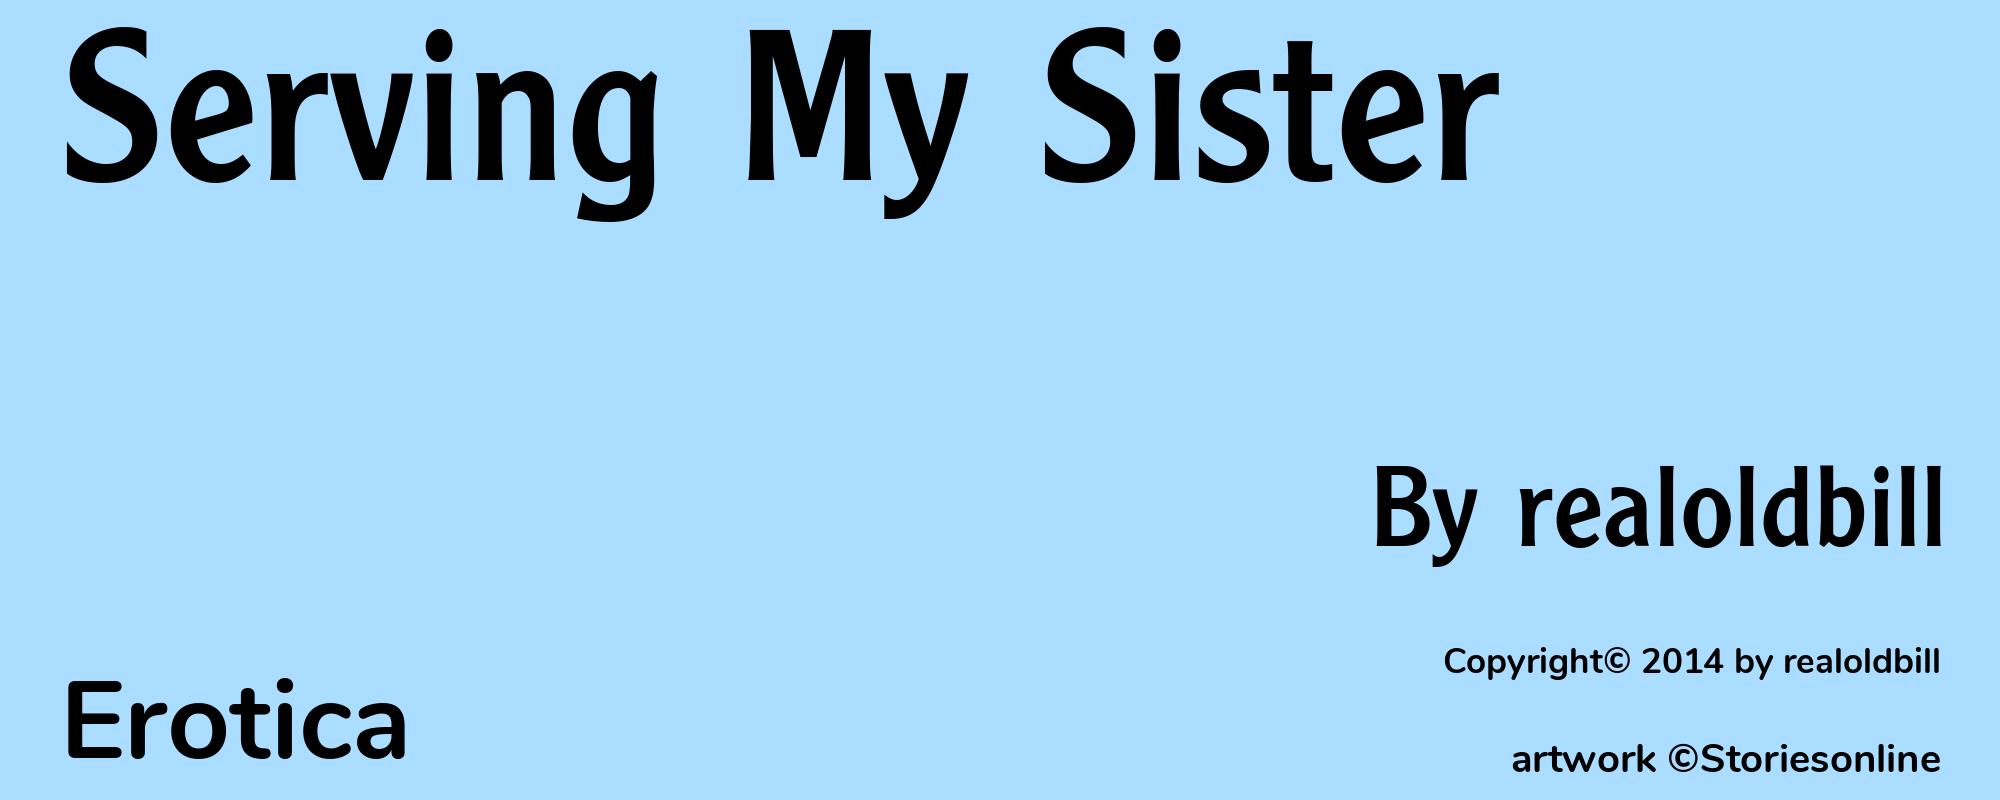 Serving My Sister - Cover